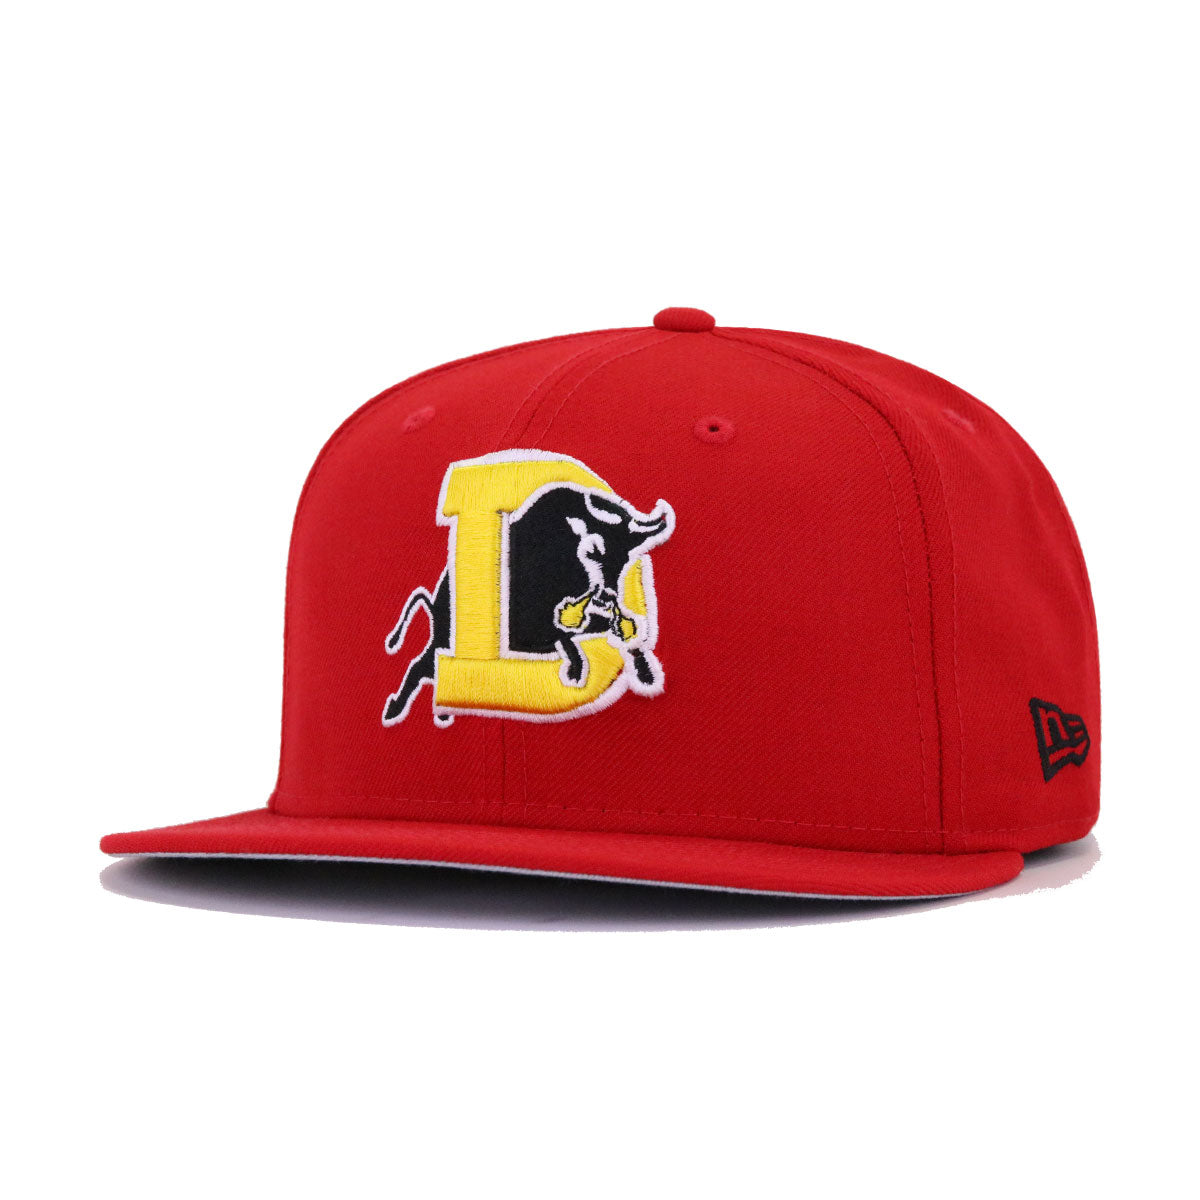 Durham Bulls Scarlet New Era 59Fifty Fitted